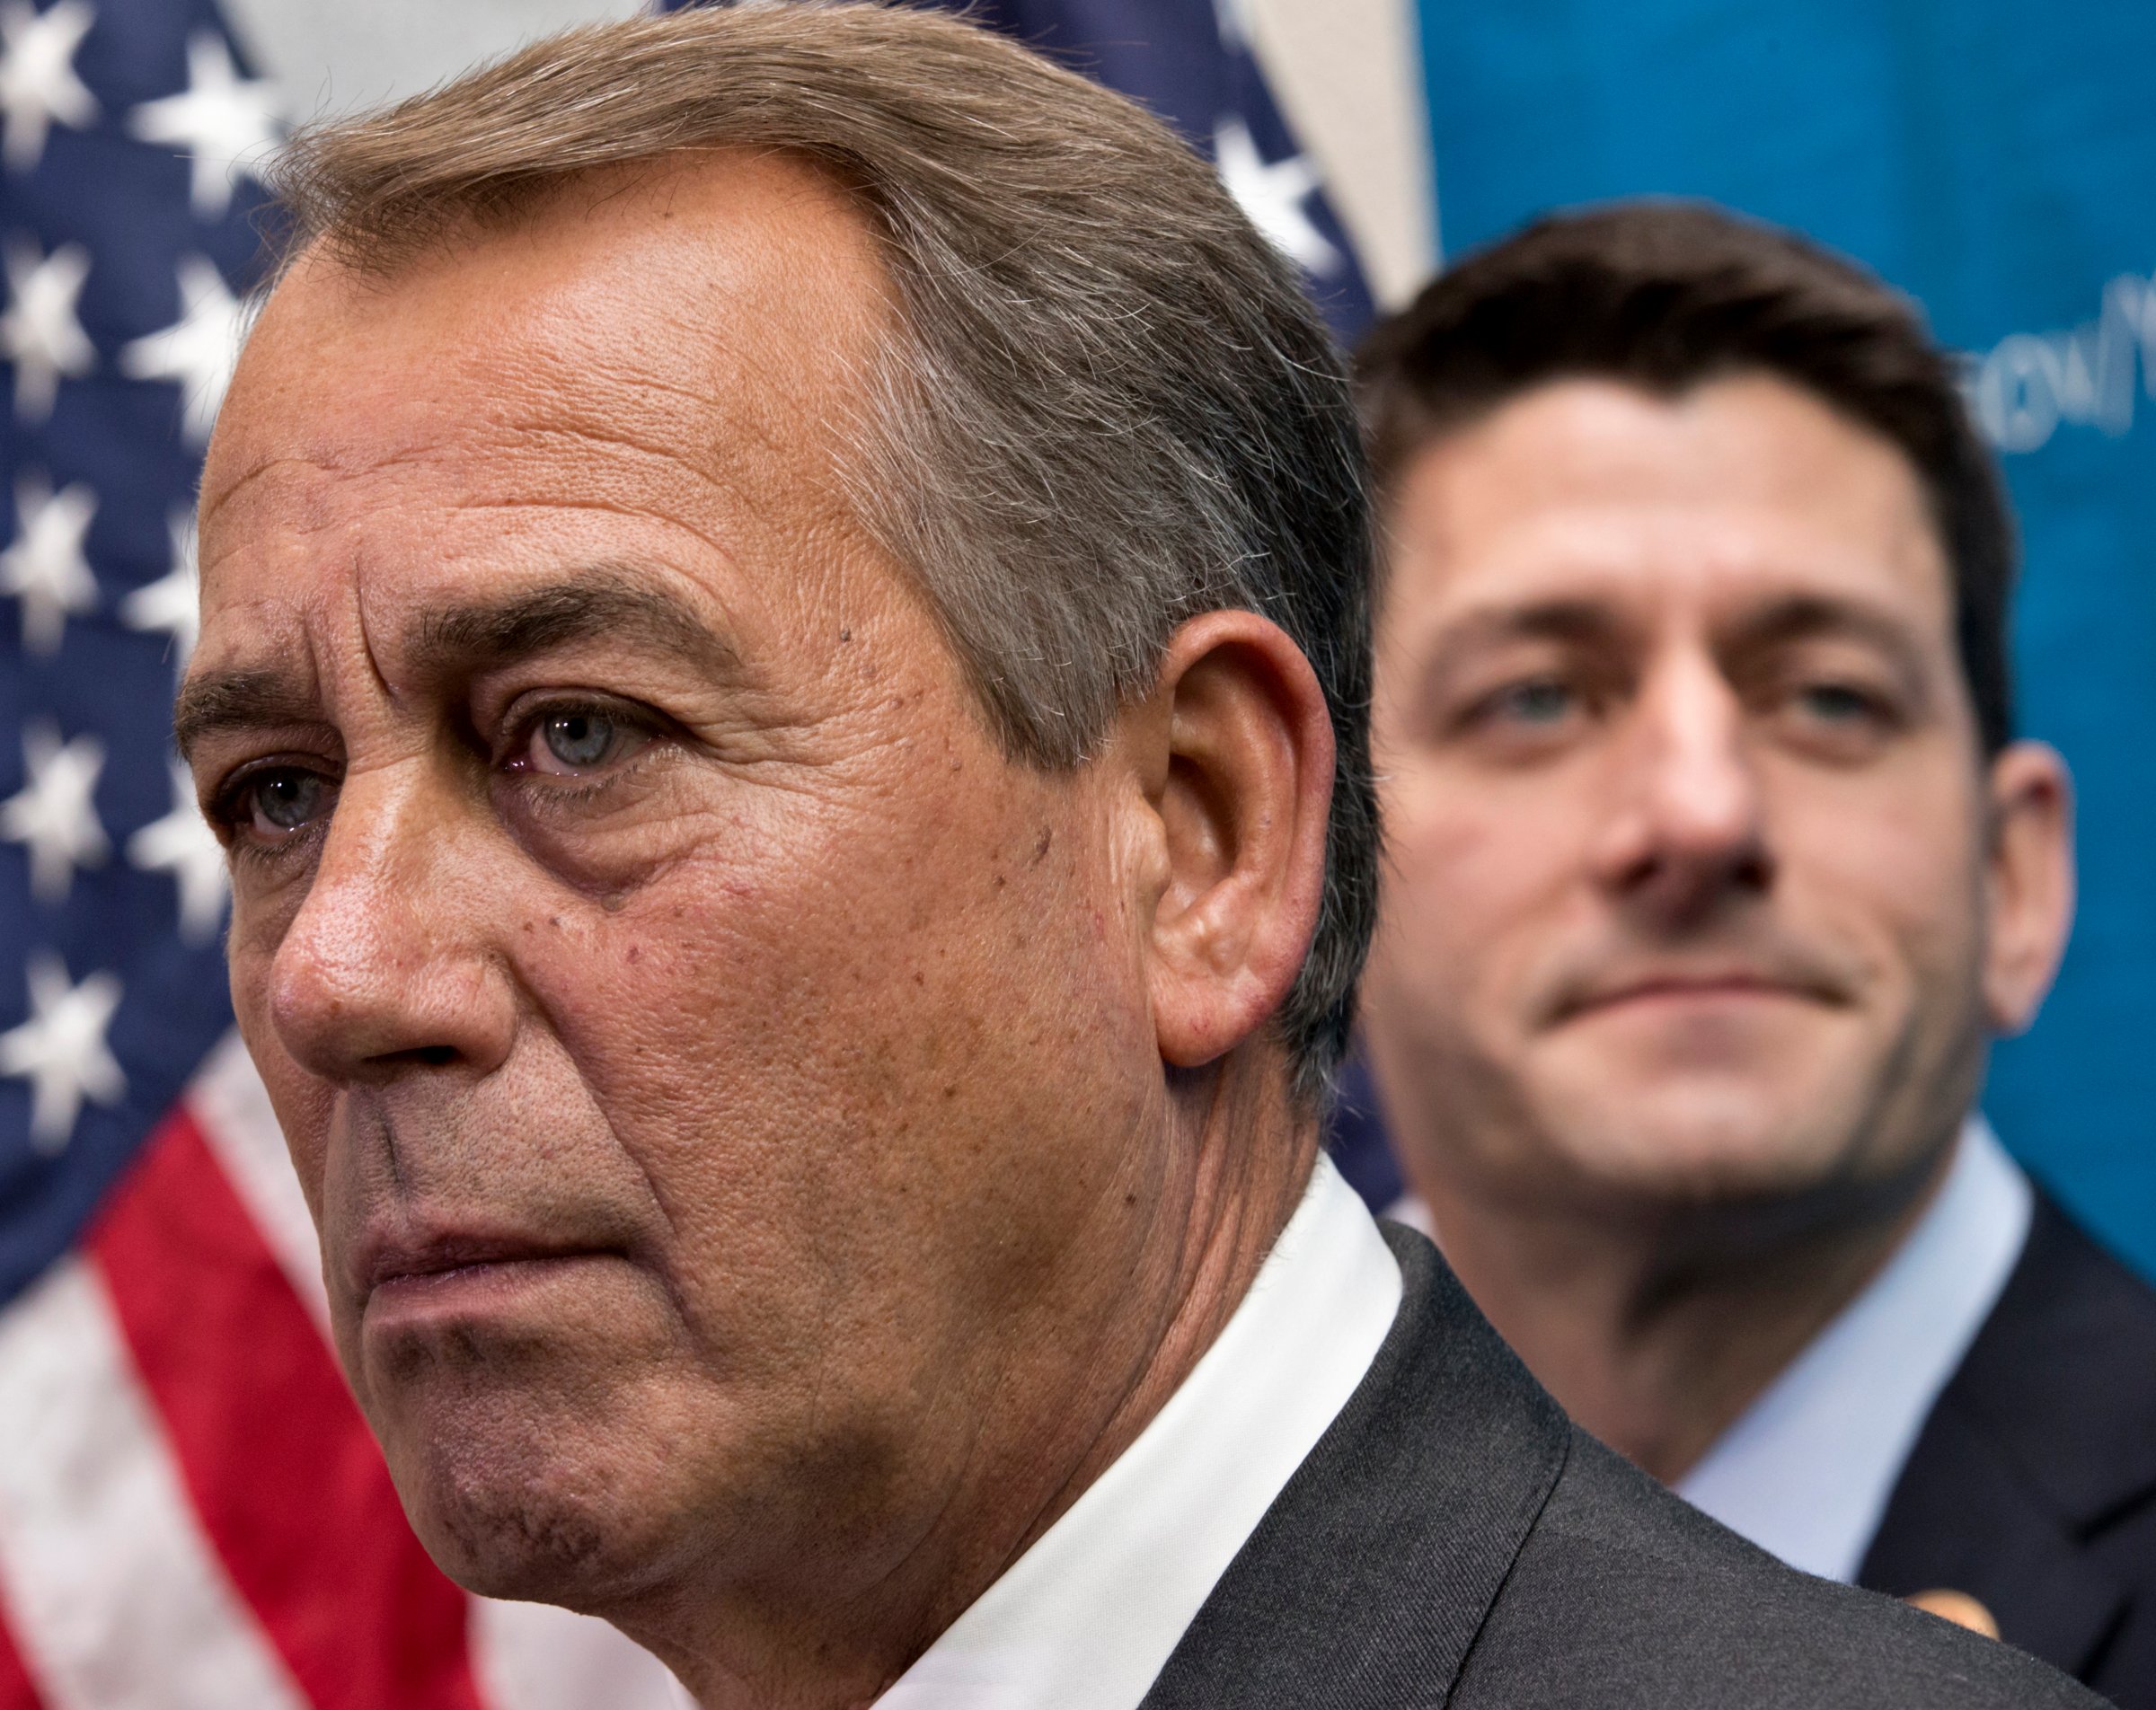 From left: House Speaker John Boehner of Ohio joined by House Budget Committee Chairman Rep. Paul Ryan takes reporters' questions, on Capitol Hill in Washington, D.C., on Dec. 11, 2013.